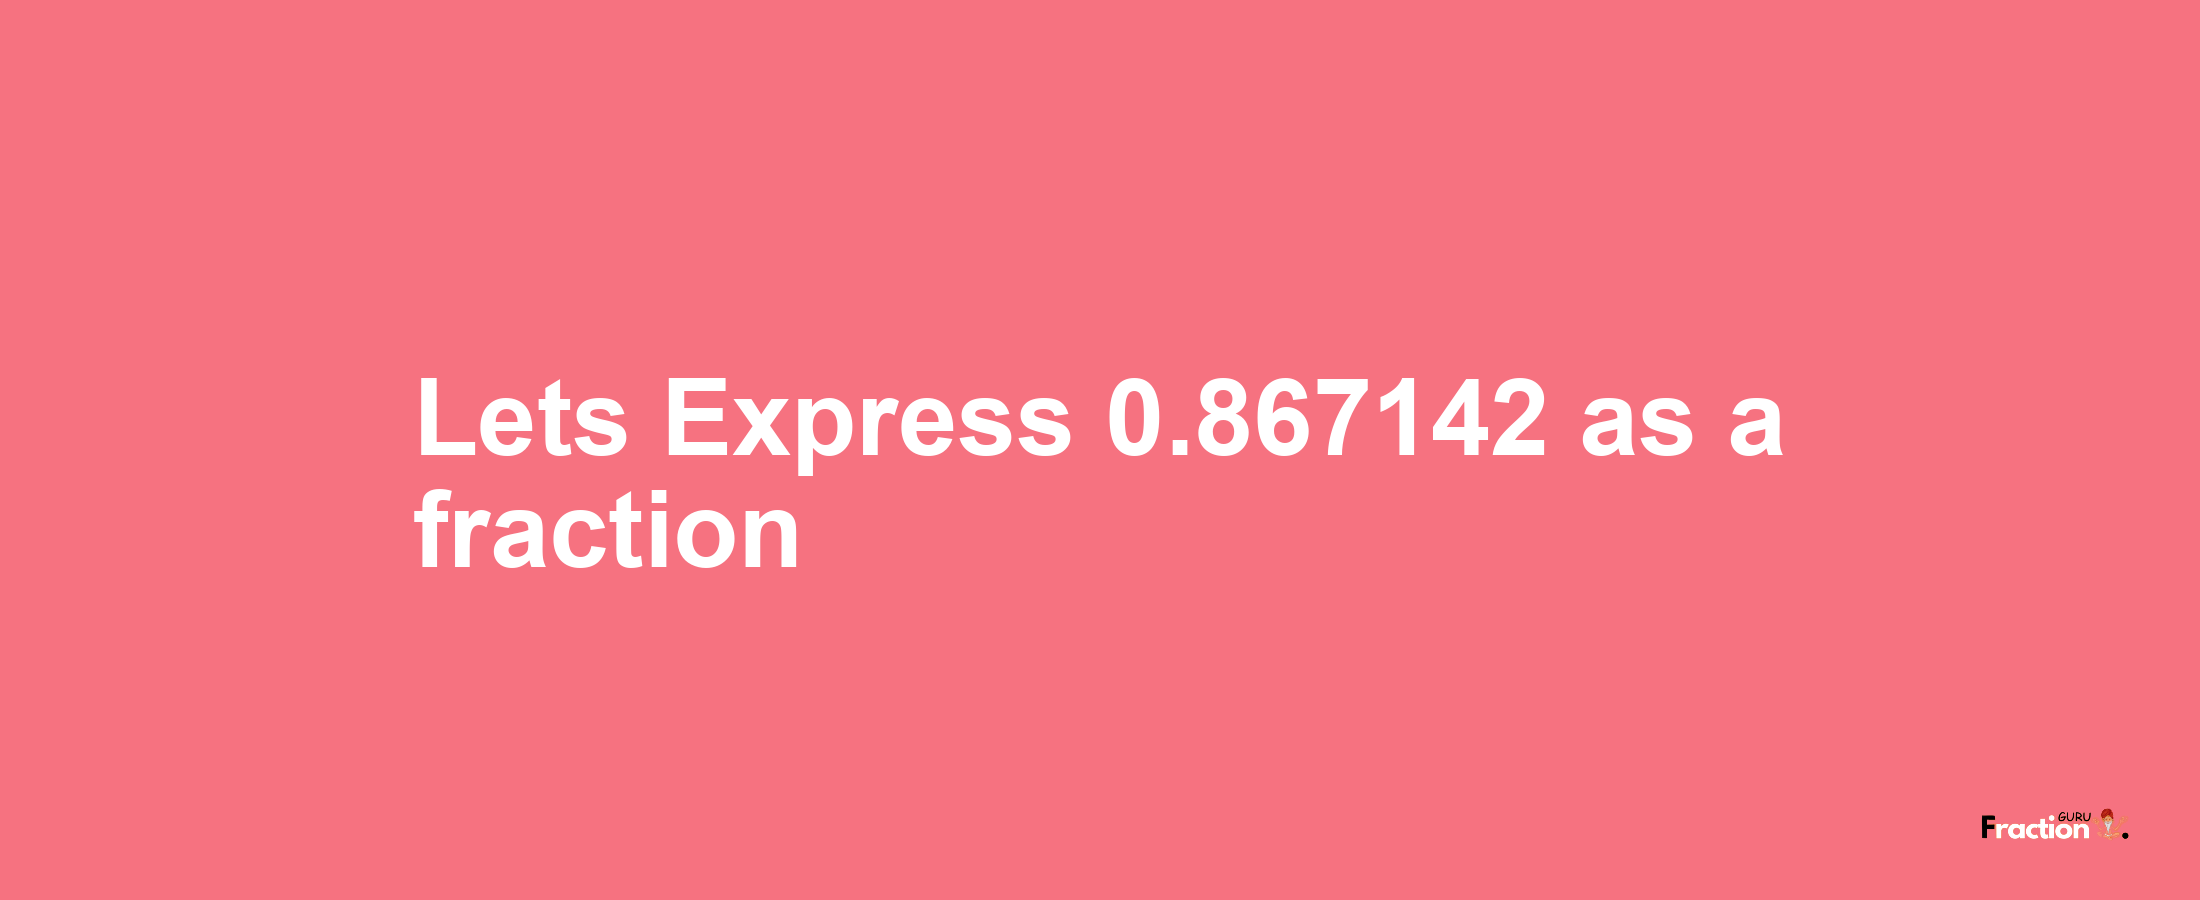 Lets Express 0.867142 as afraction